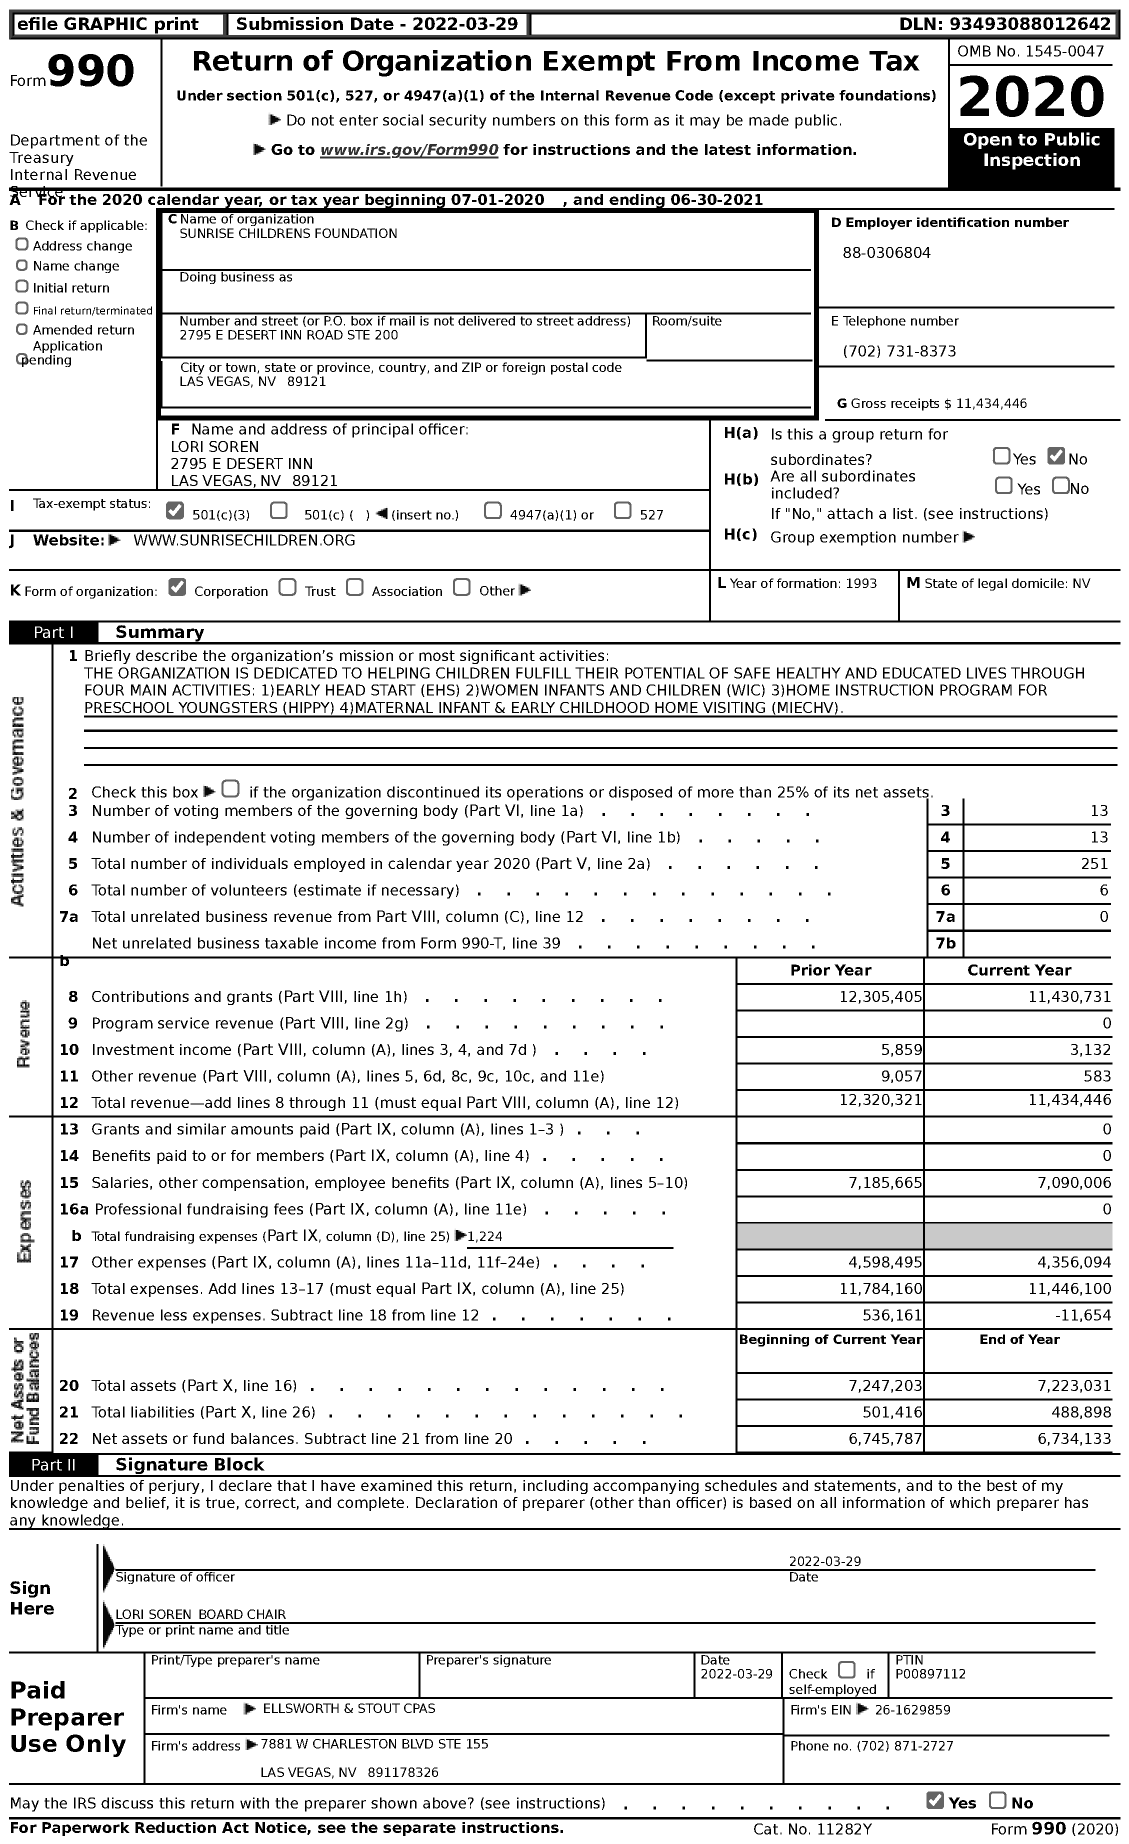 Image of first page of 2020 Form 990 for Sunrise Childrens Foundation (SCF)